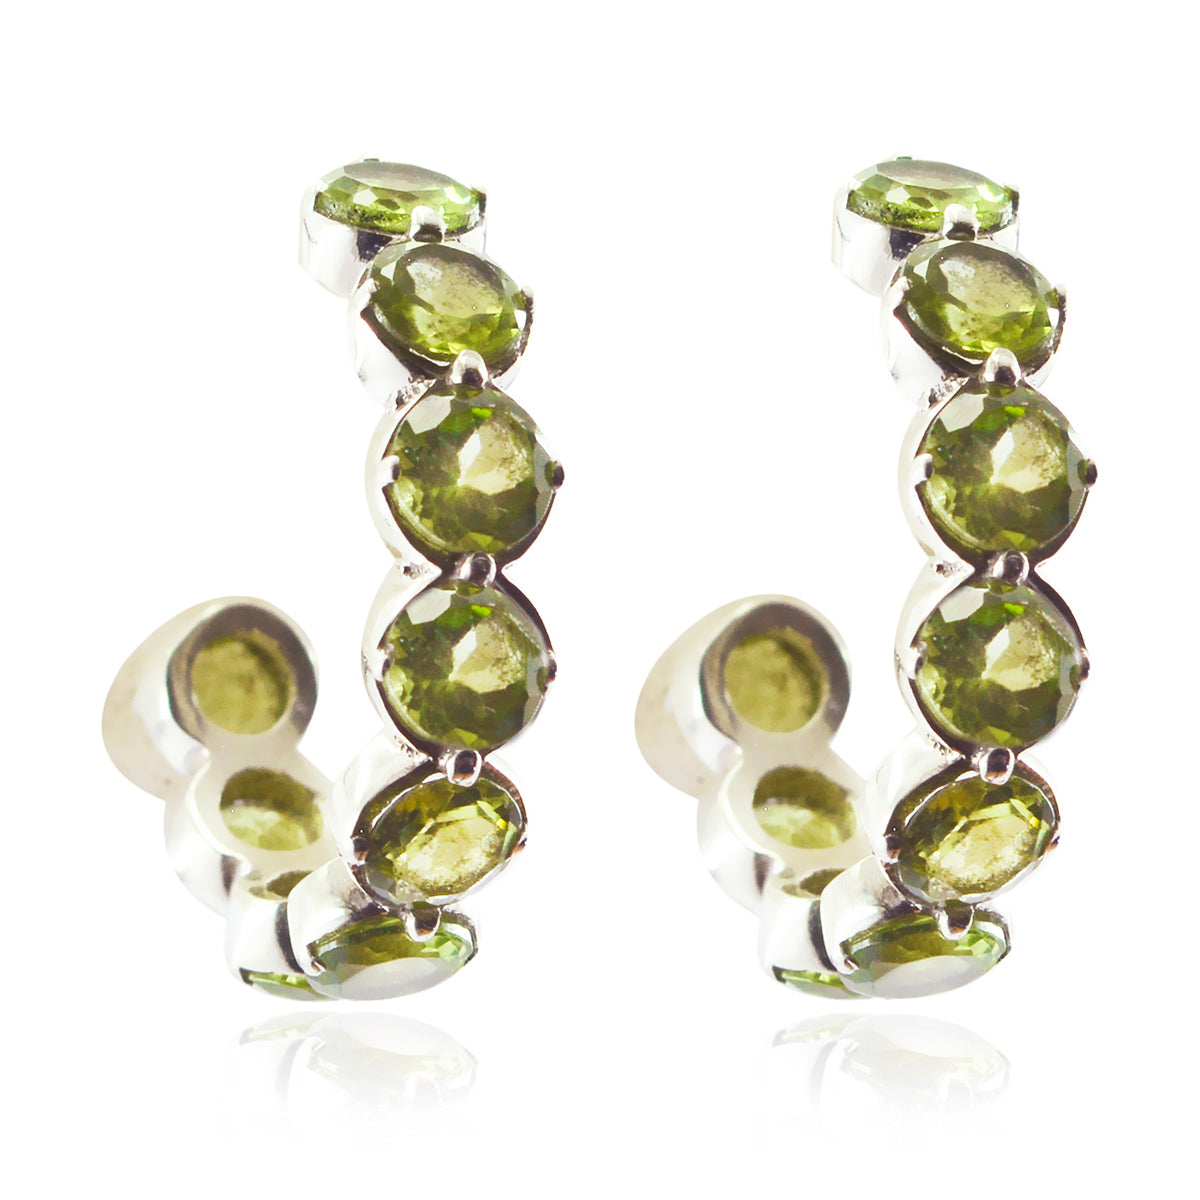 Riyo Nice Gemstone round Faceted Green Peridot Silver Earring gift for anniversary